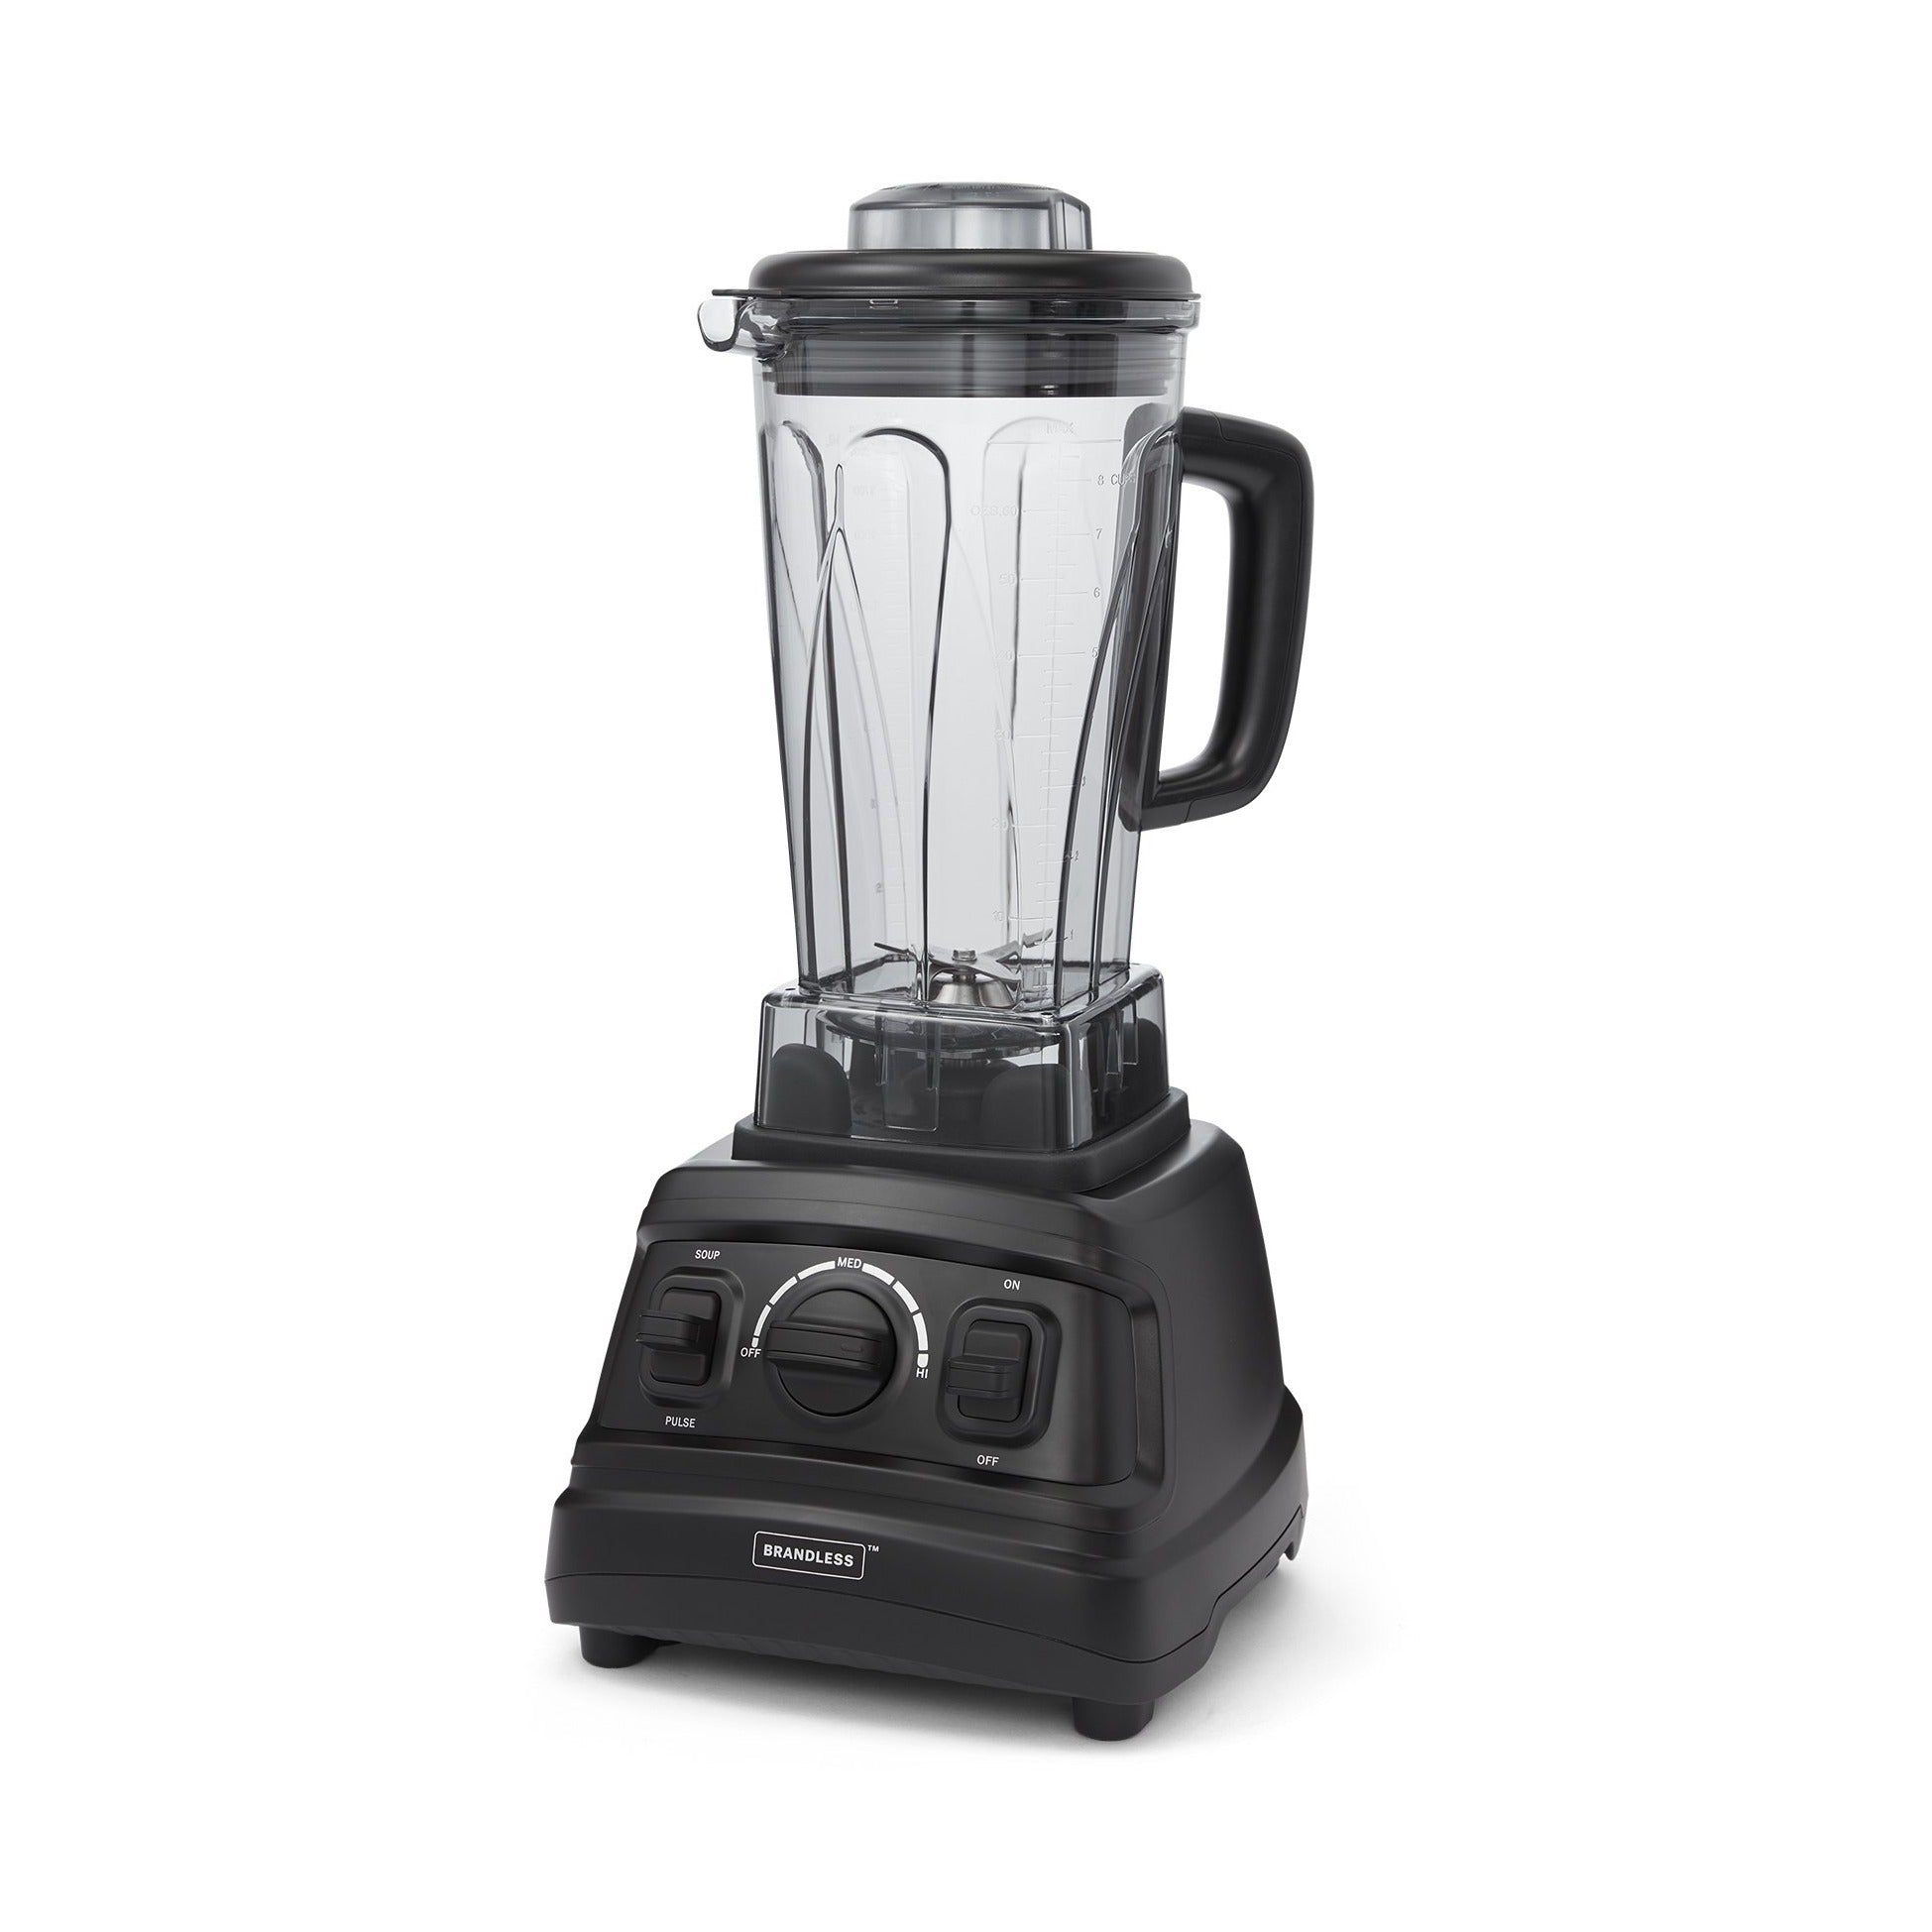 Pro-Blender for Smoothies, Shakes, and Food with Tamper, 2 HP Motor, 6 -  Brandless